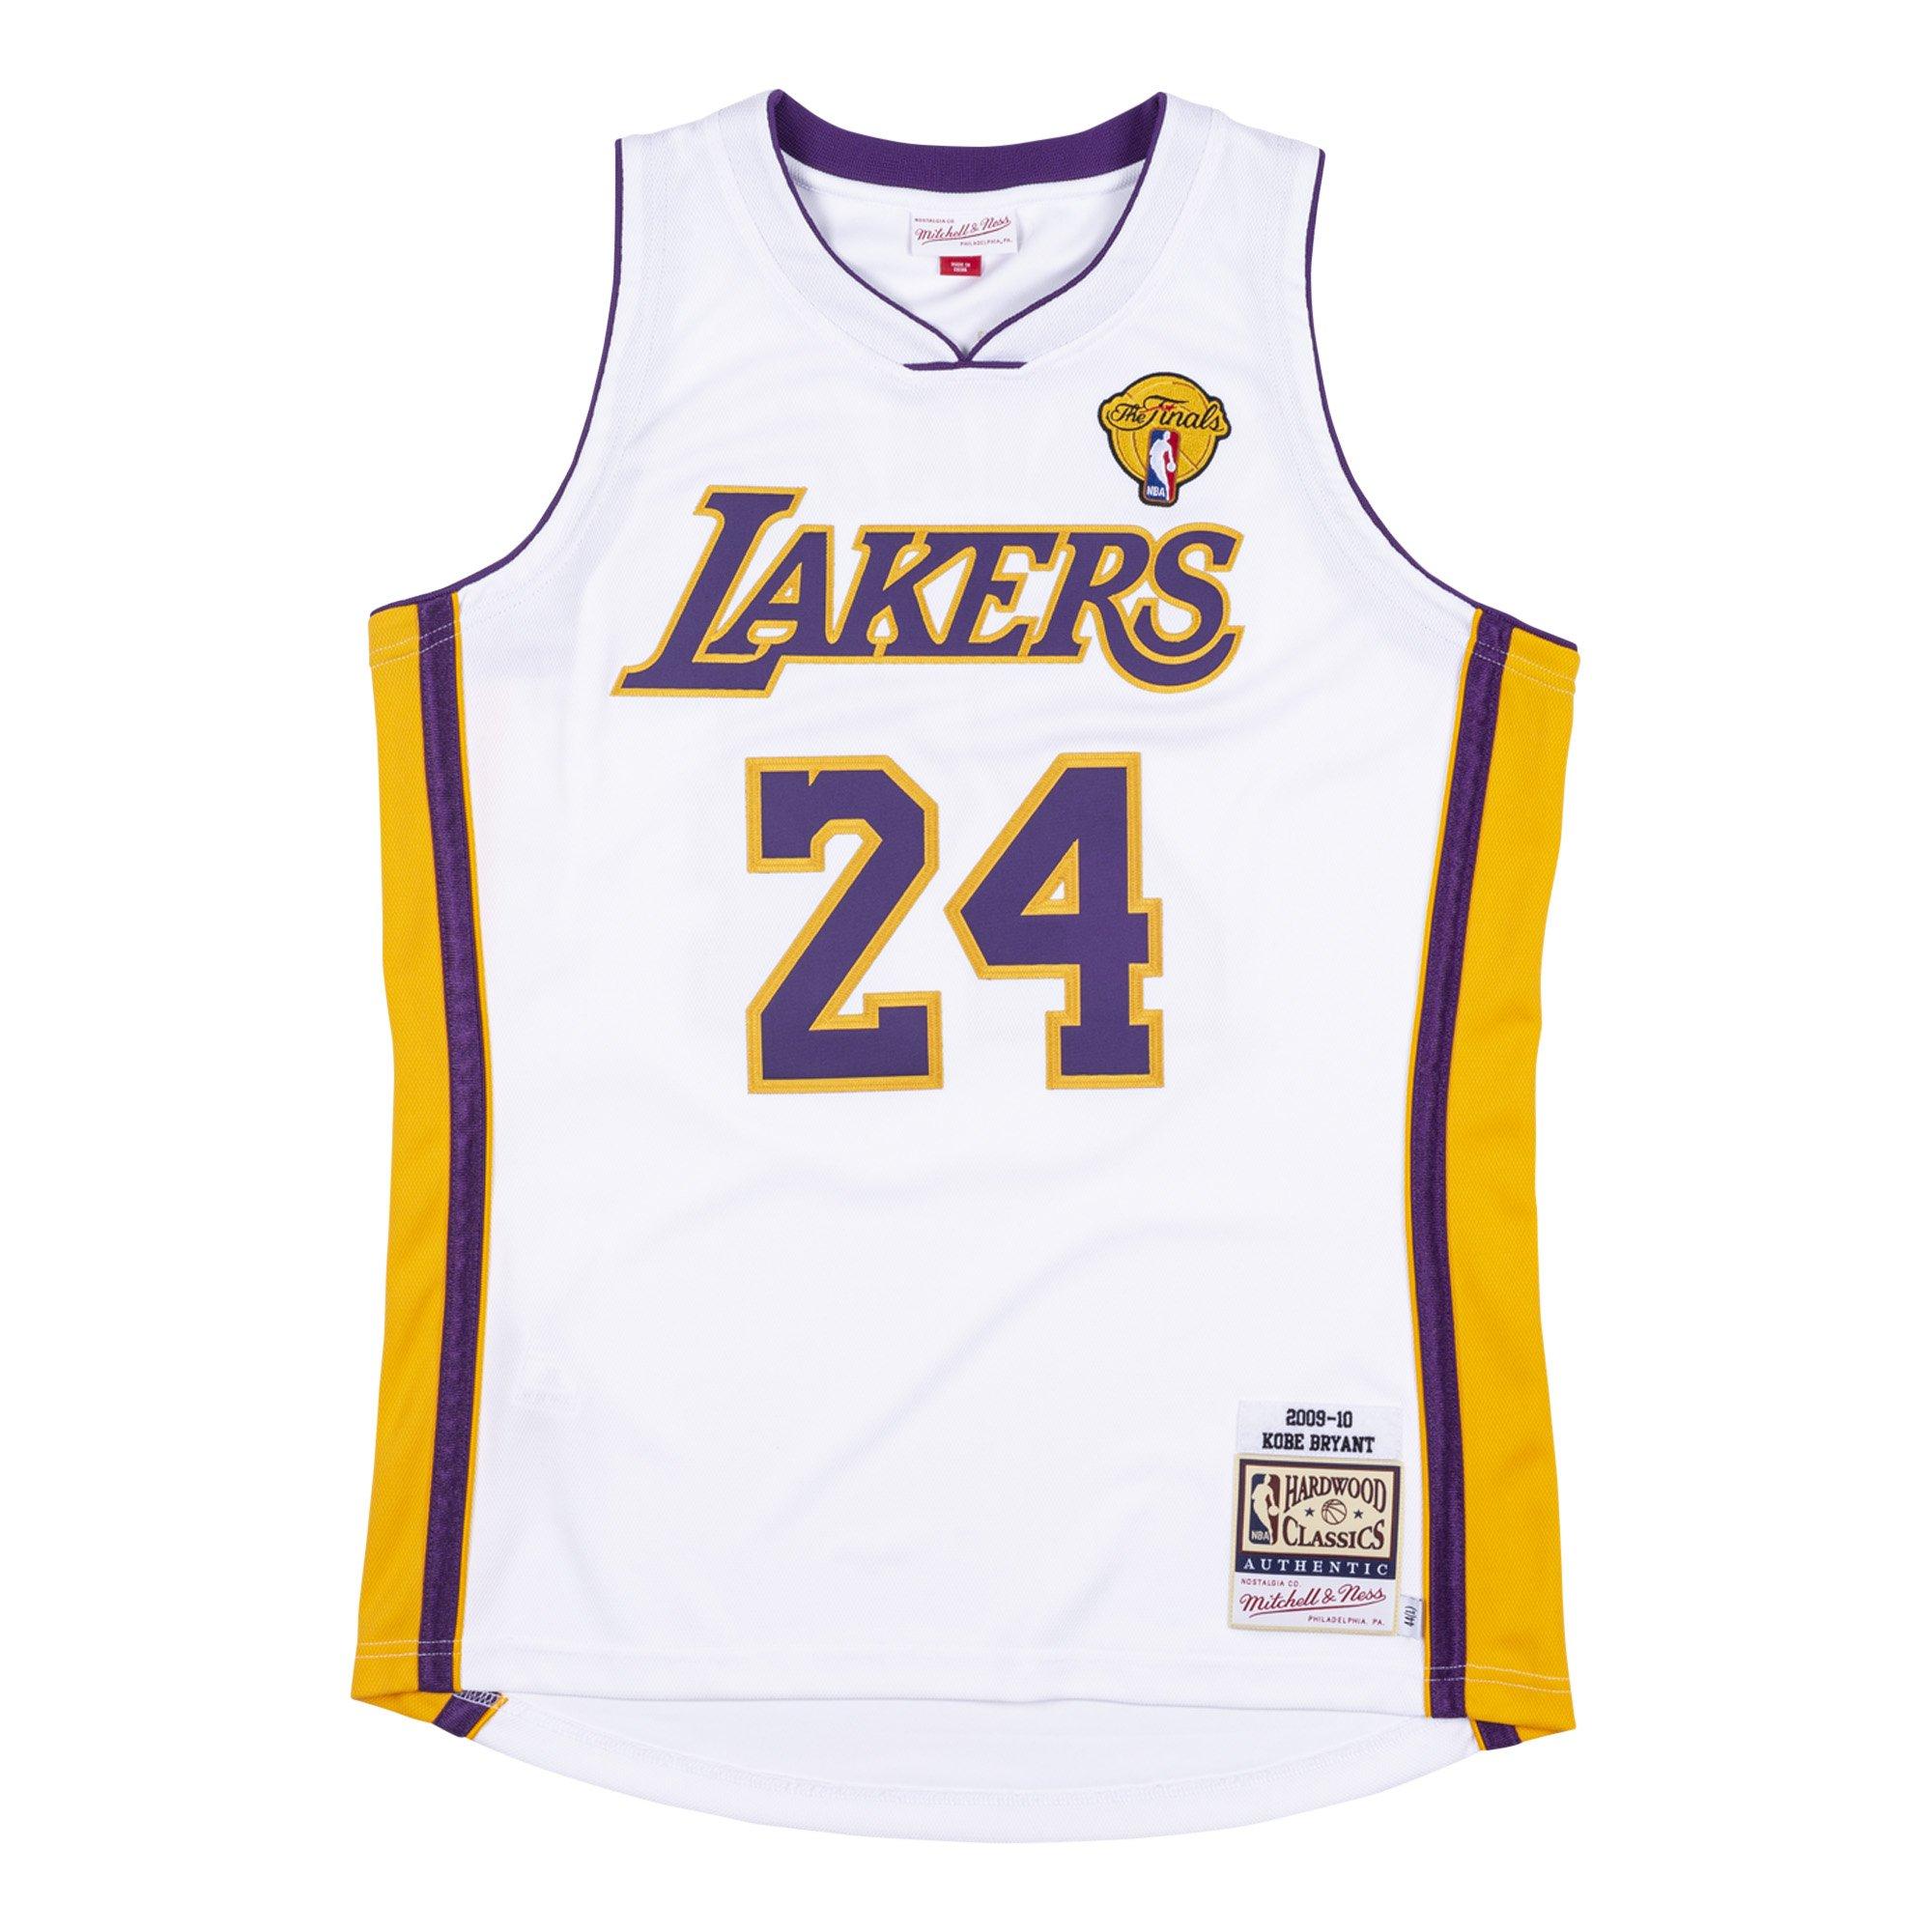 Mitchell & Ness Men's K. Bryant Los Angeles Lakers 09'-10' Finals Authentic Hardwood Classics Jersey